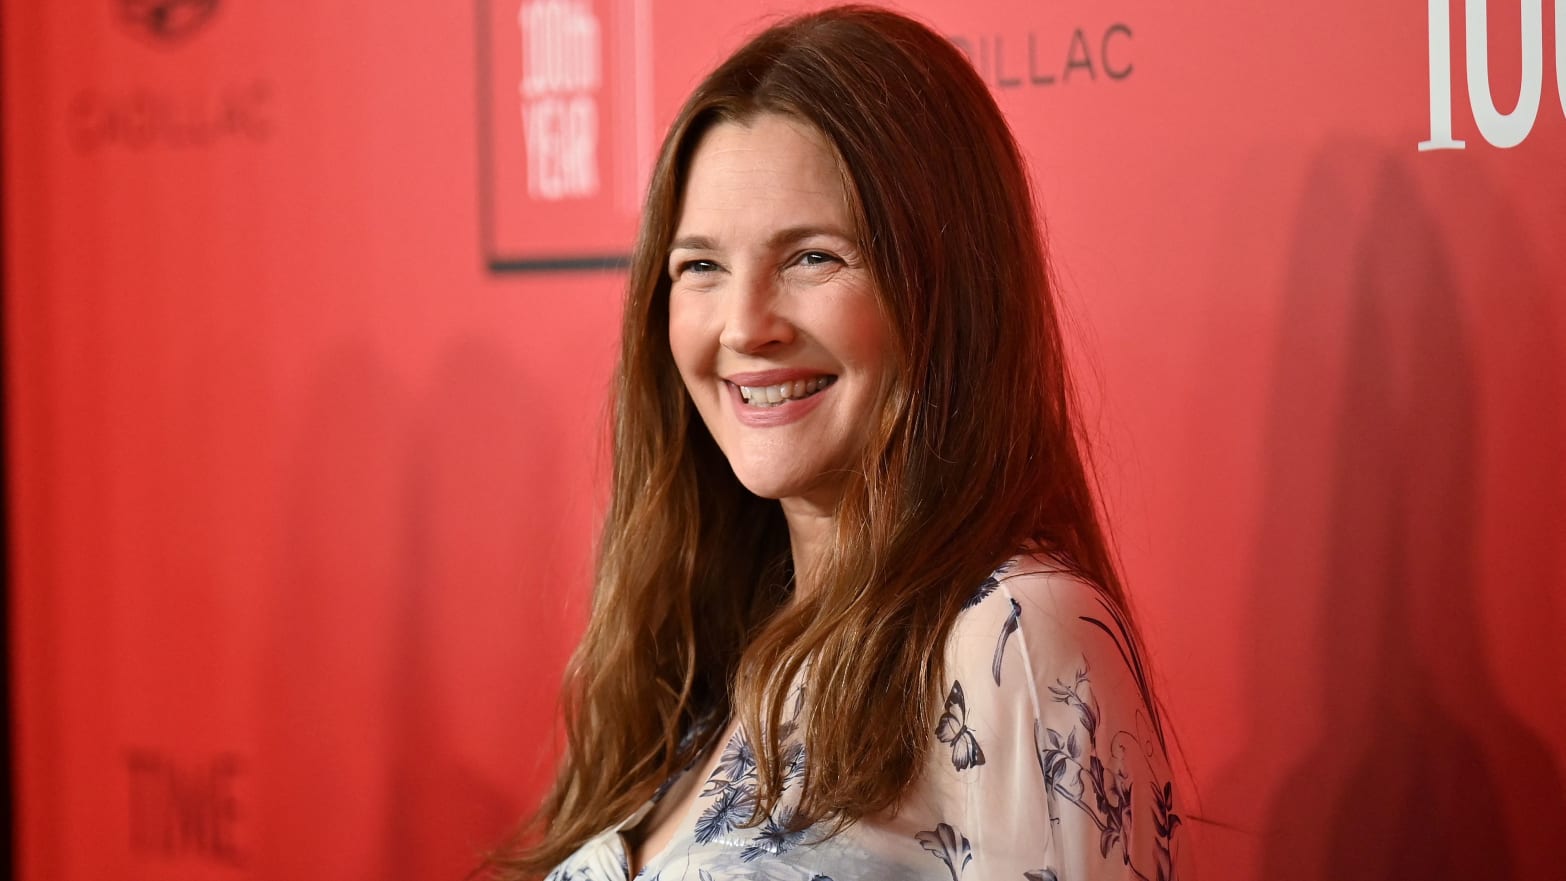 Drew Barrymore on the red carpet at the Time 100 Gala.